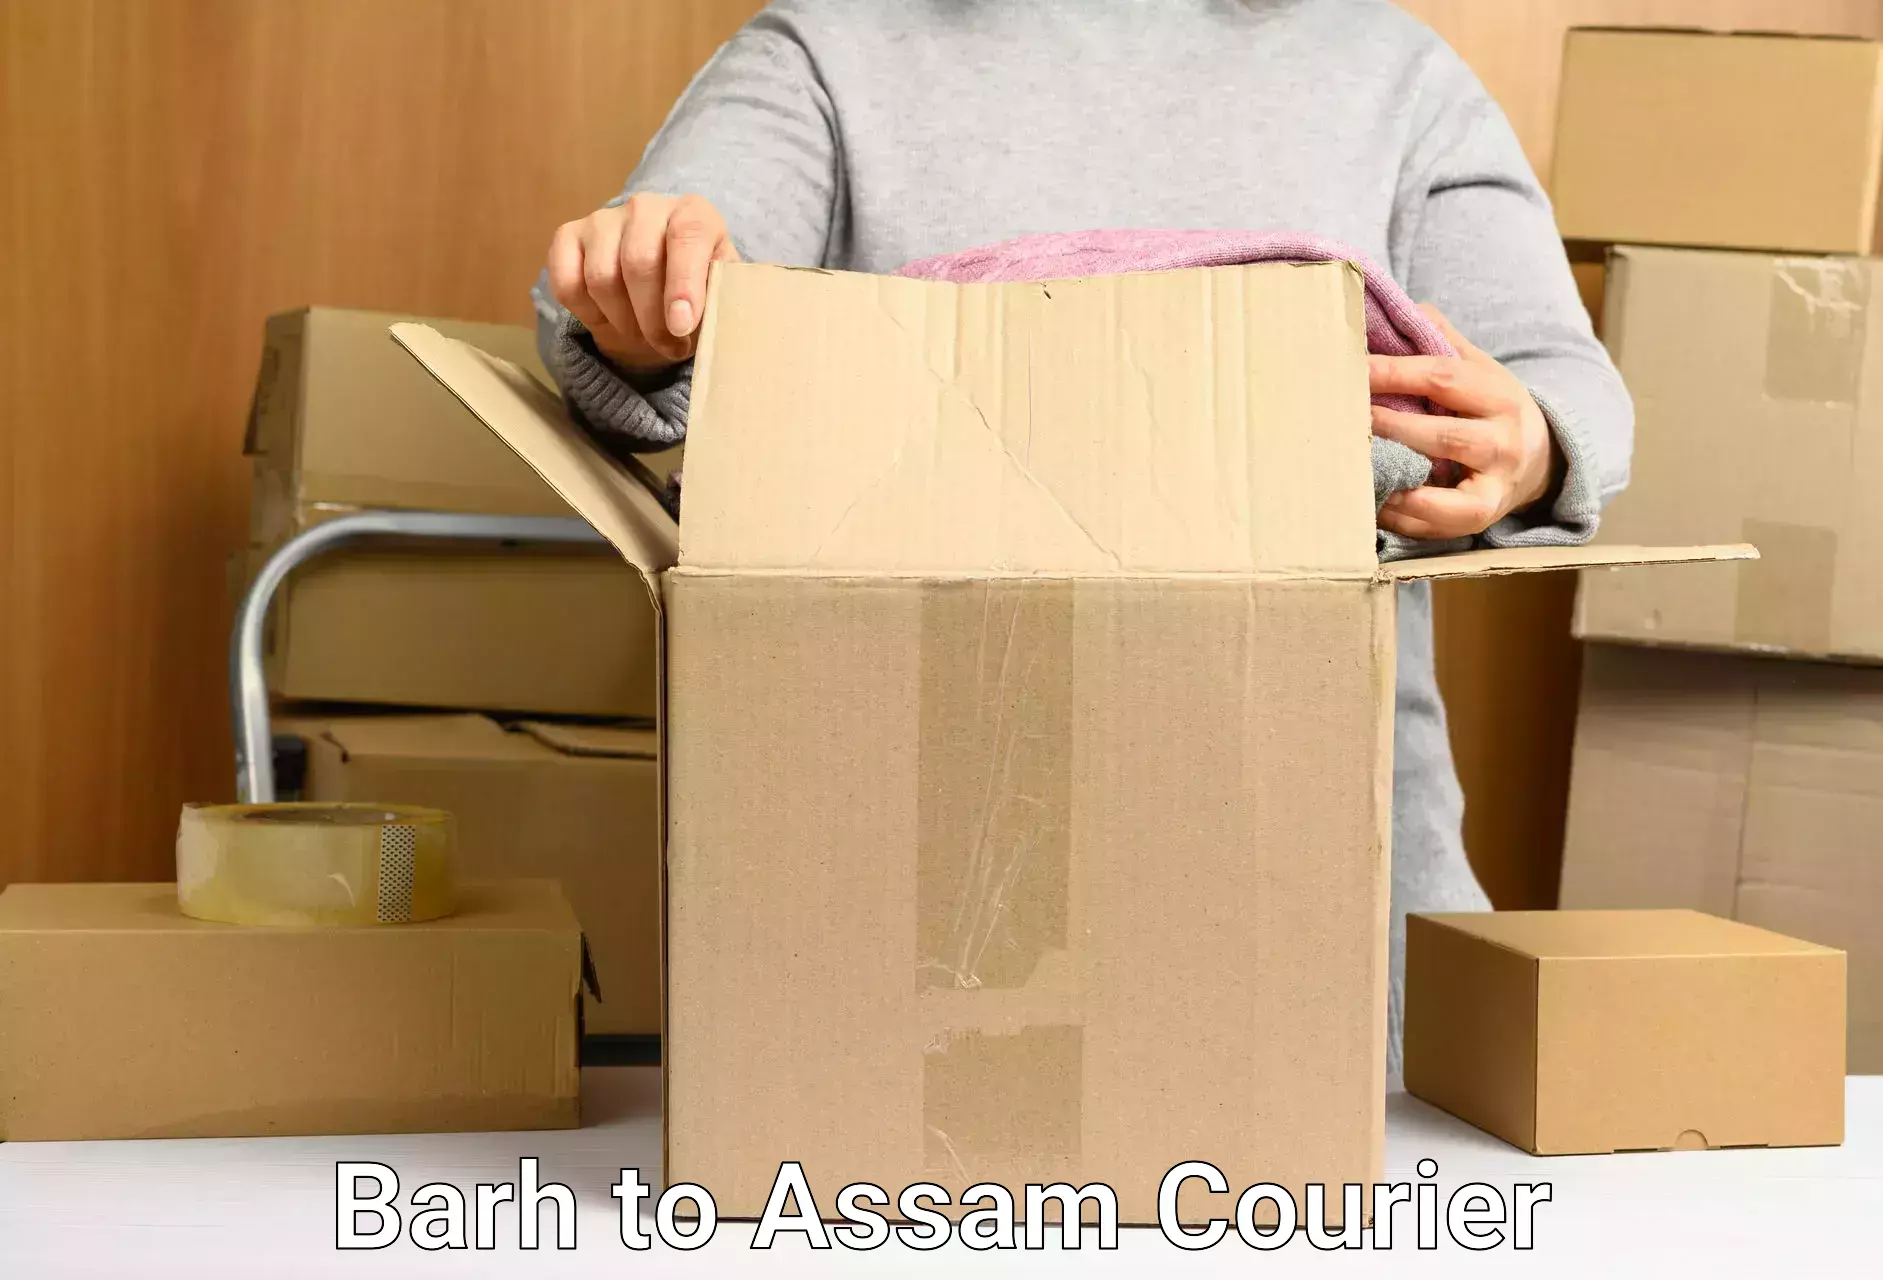 Sustainable shipping practices in Barh to Assam